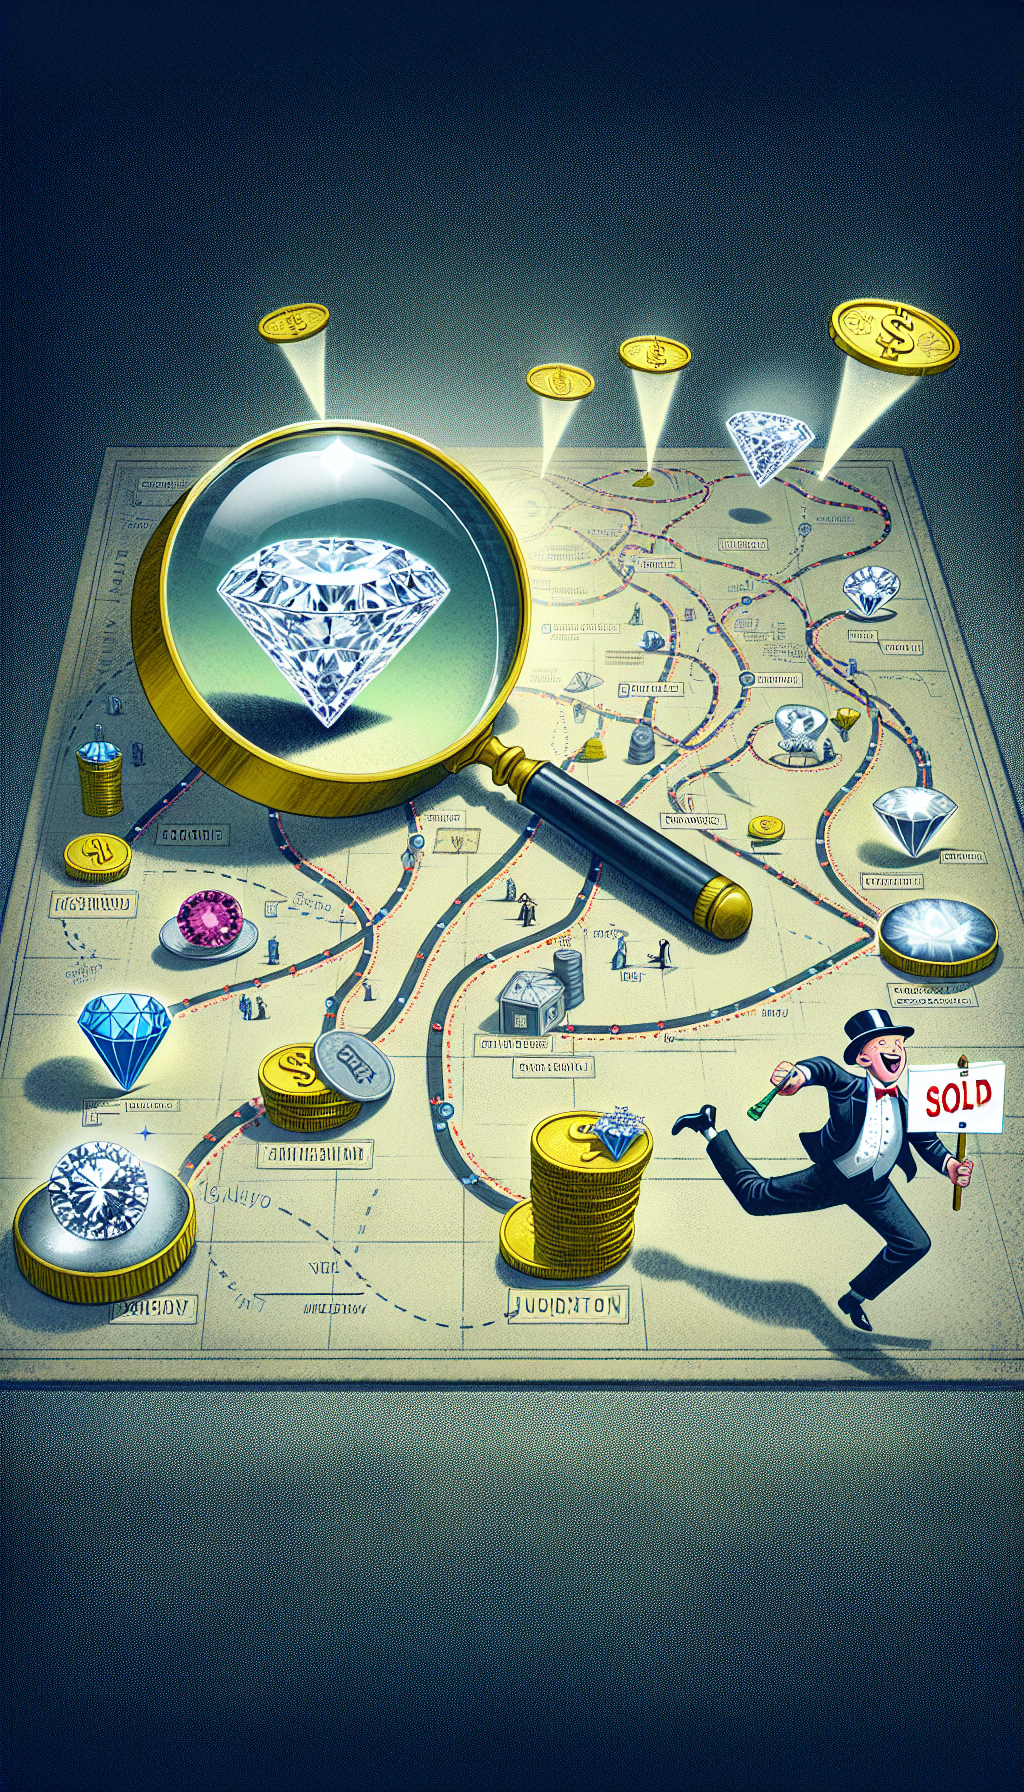 An illustration shows an elegant magnifying glass inspecting sparkling jewelry atop a treasure map, with distinct paths leading to reputable jewelers, auction houses, and online marketplaces. Each path is dotted with coins and dollar signs, symbolizing the journey to maximizing value, while a character gleefully follows a path, holding a 'SOLD' sign. The style alternates between realistic jewels and cartoonish paths and characters.